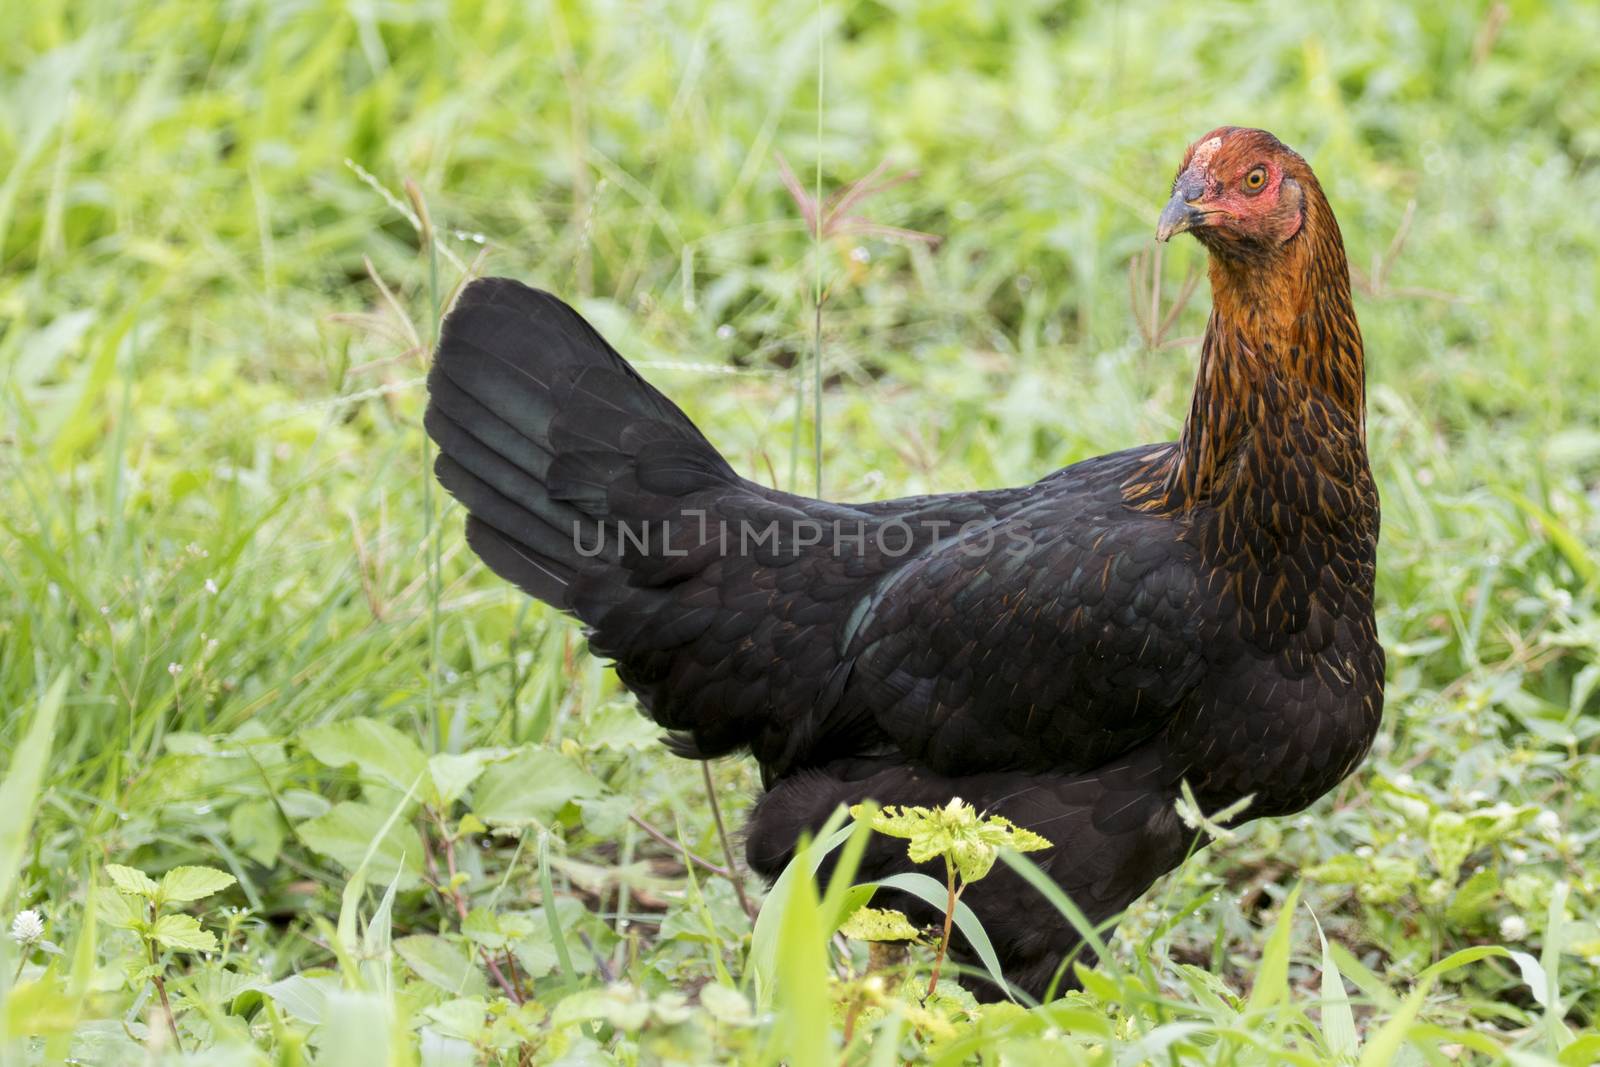 Image of a hen in green field. by yod67